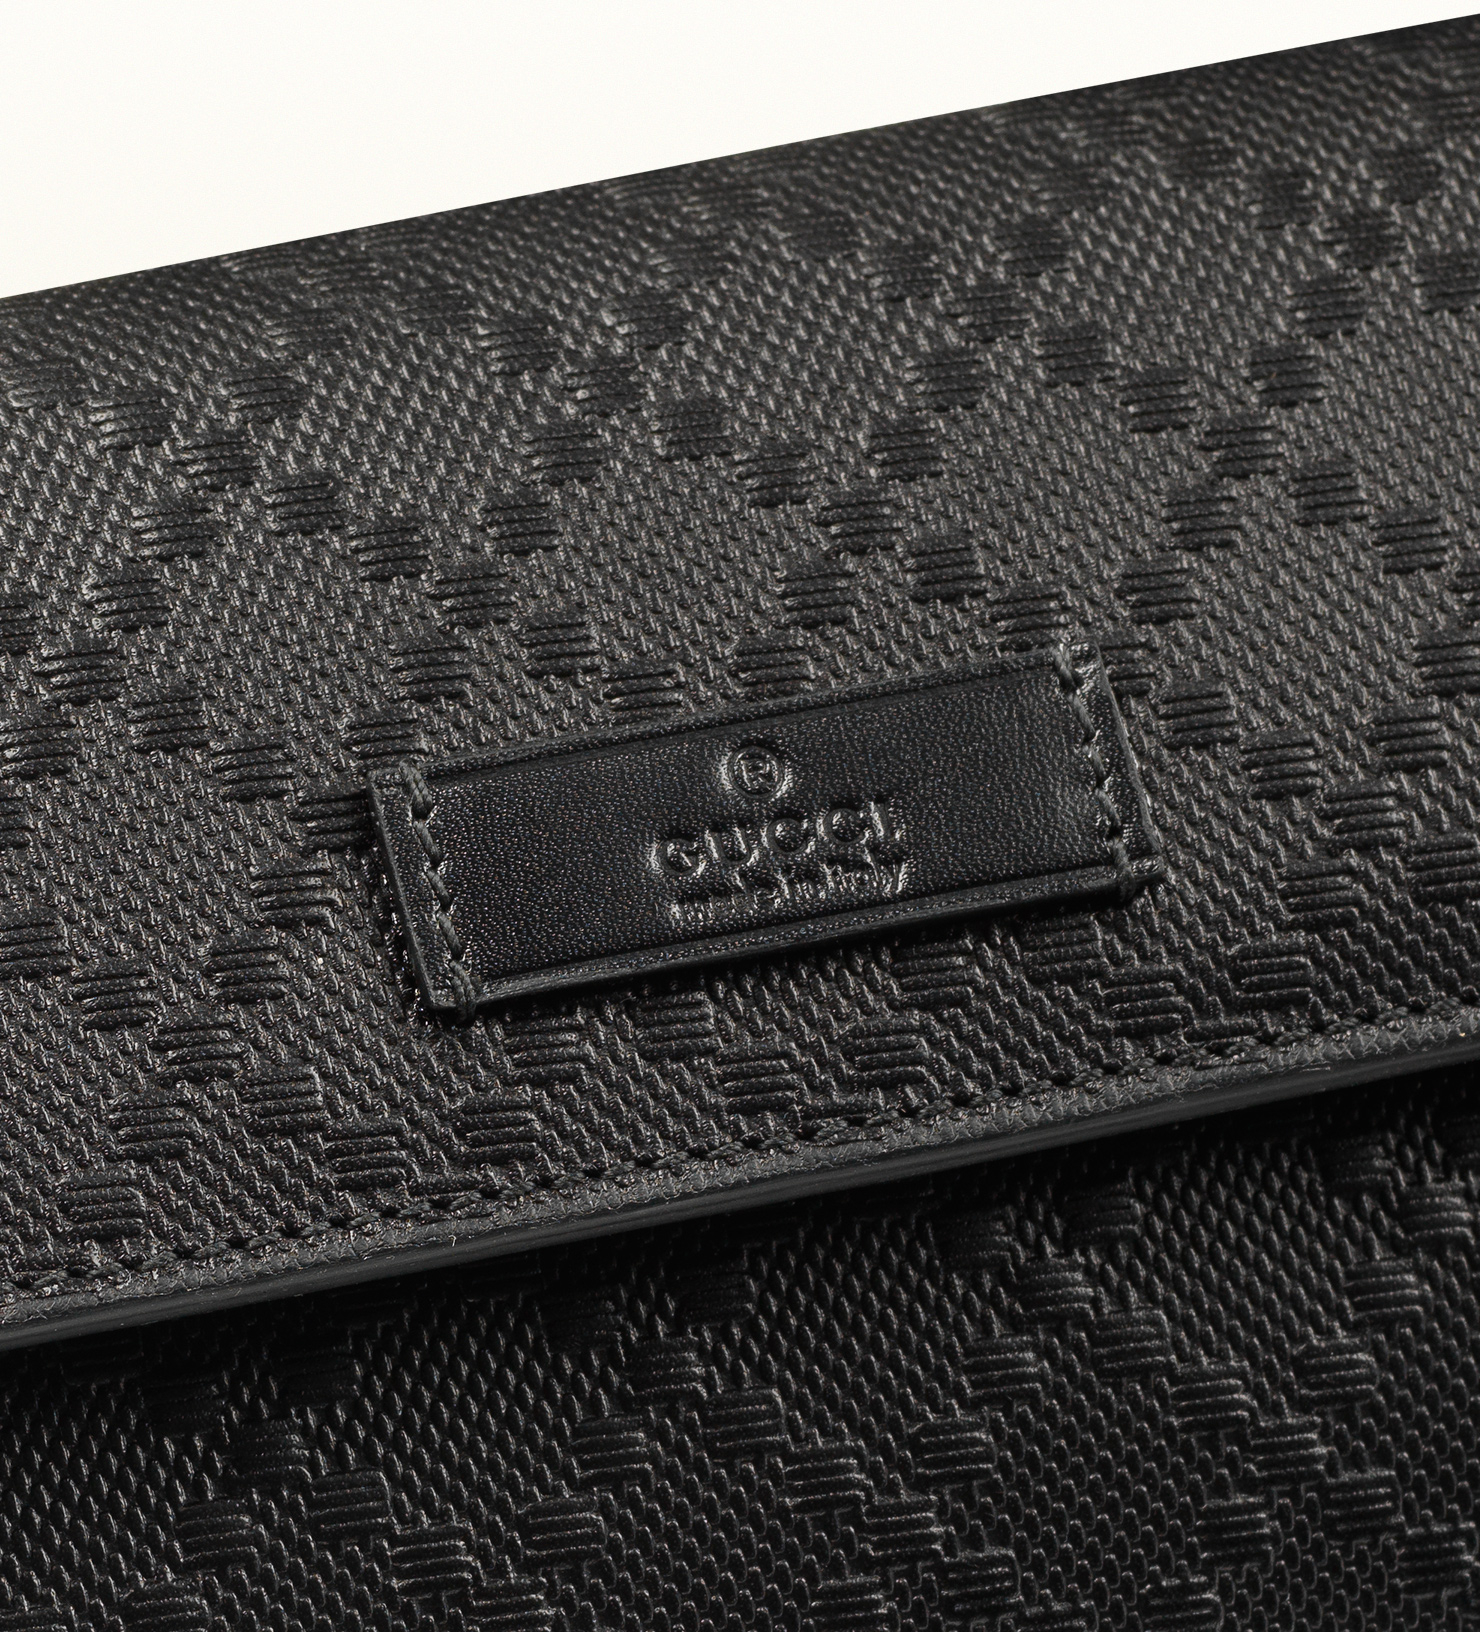 Lyst - Gucci Signature Long Wallet in Black for Men